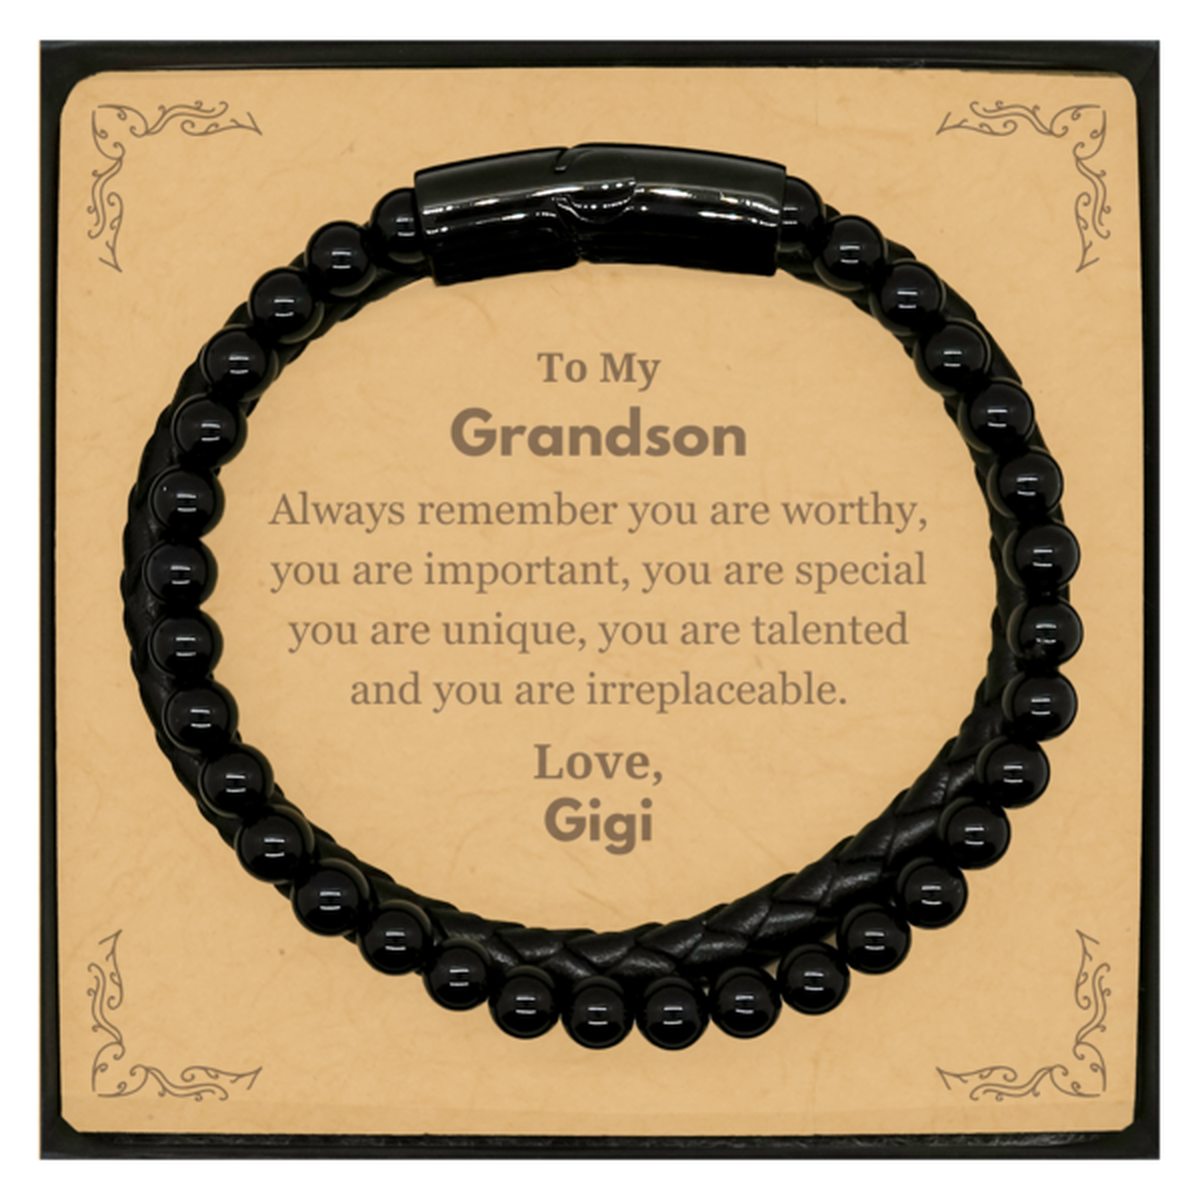 Grandson Birthday Gifts from Gigi, Inspirational Stone Leather Bracelets for Grandson Christmas Graduation Gifts for Grandson Always remember you are worthy, you are important. Love, Gigi